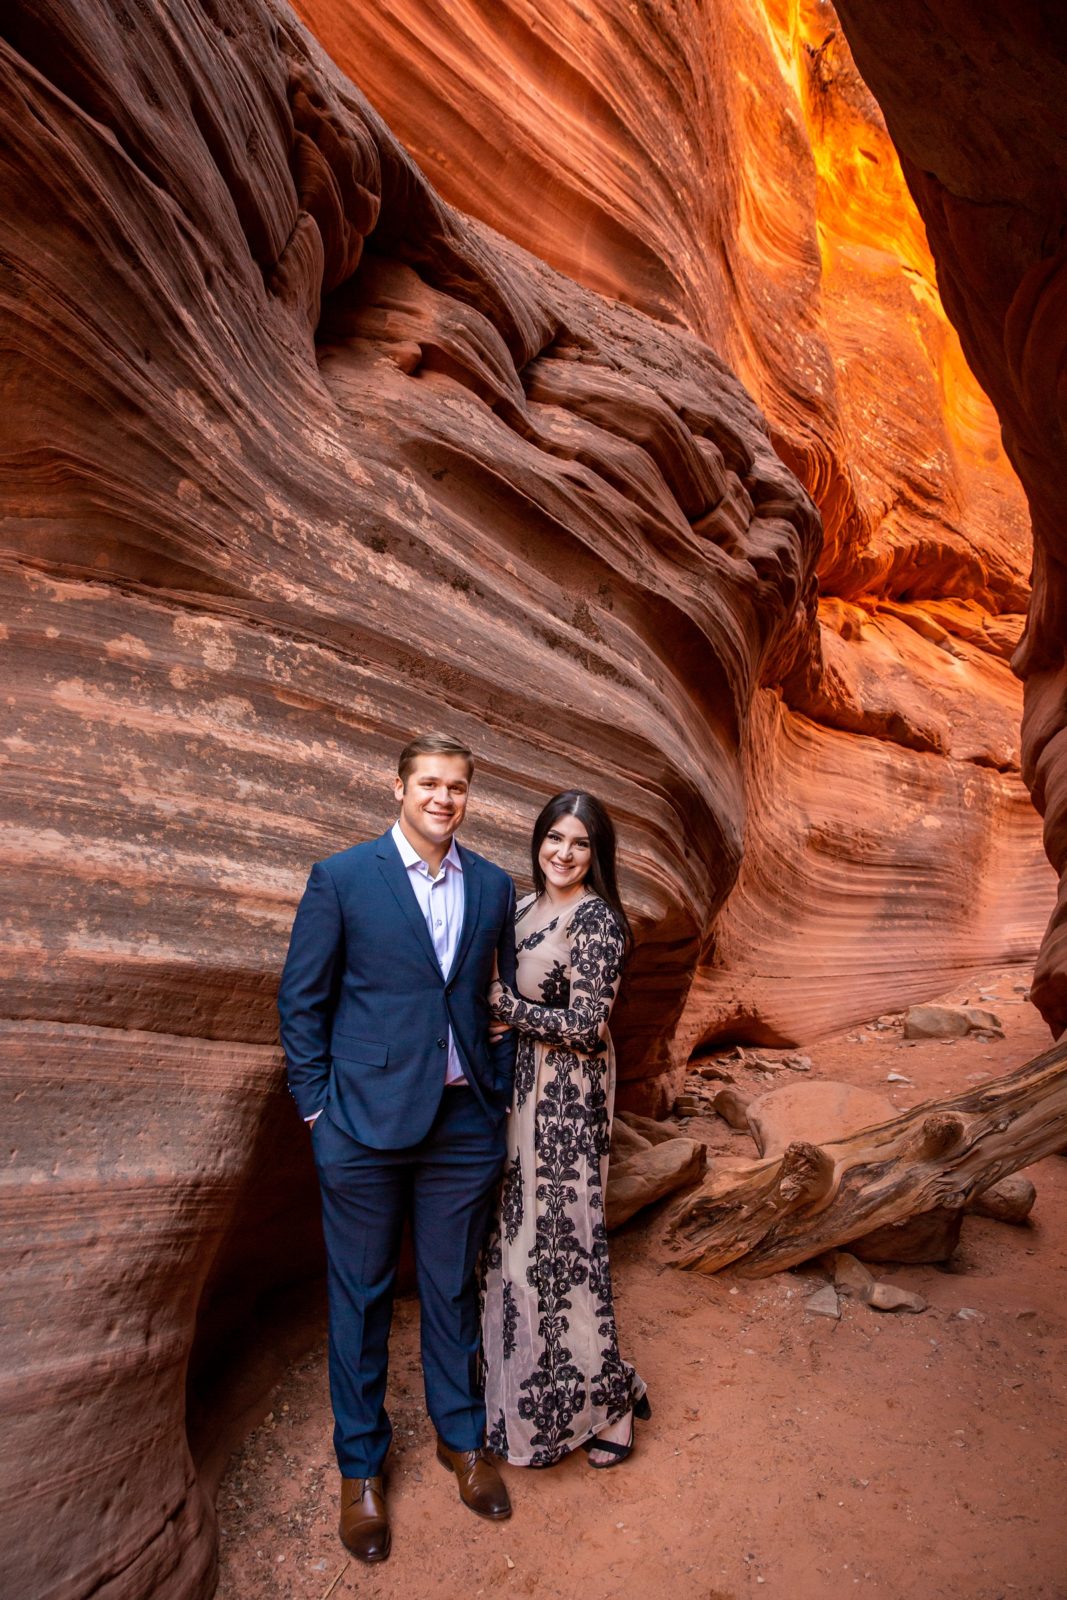 This couple got engaged in a Southern Utah slot canyon.